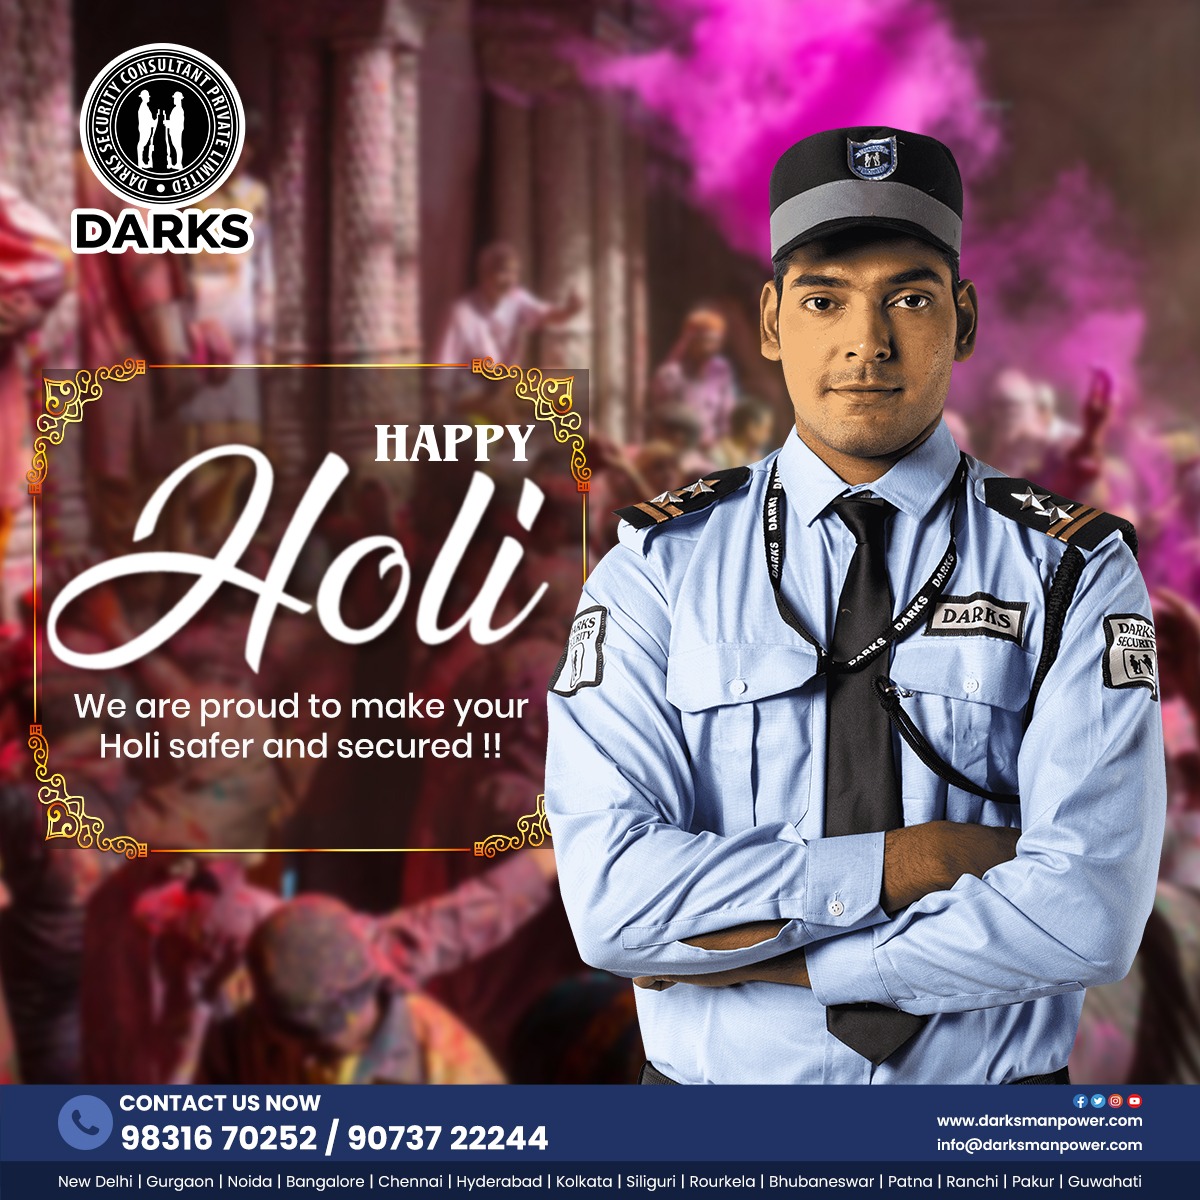 We pledge to make your Holi safer and secure.

Call us now
📞Call: +91 98316 70251
📧Mail: darks_hm@darks.in

#securitycompany #securityservices #darkssecurity #buranamanoholihai #HoliJoy #ColorfulCelebrations #FestivalOfColors #ColorSplash #HoliFestivities #HappyHoli2024